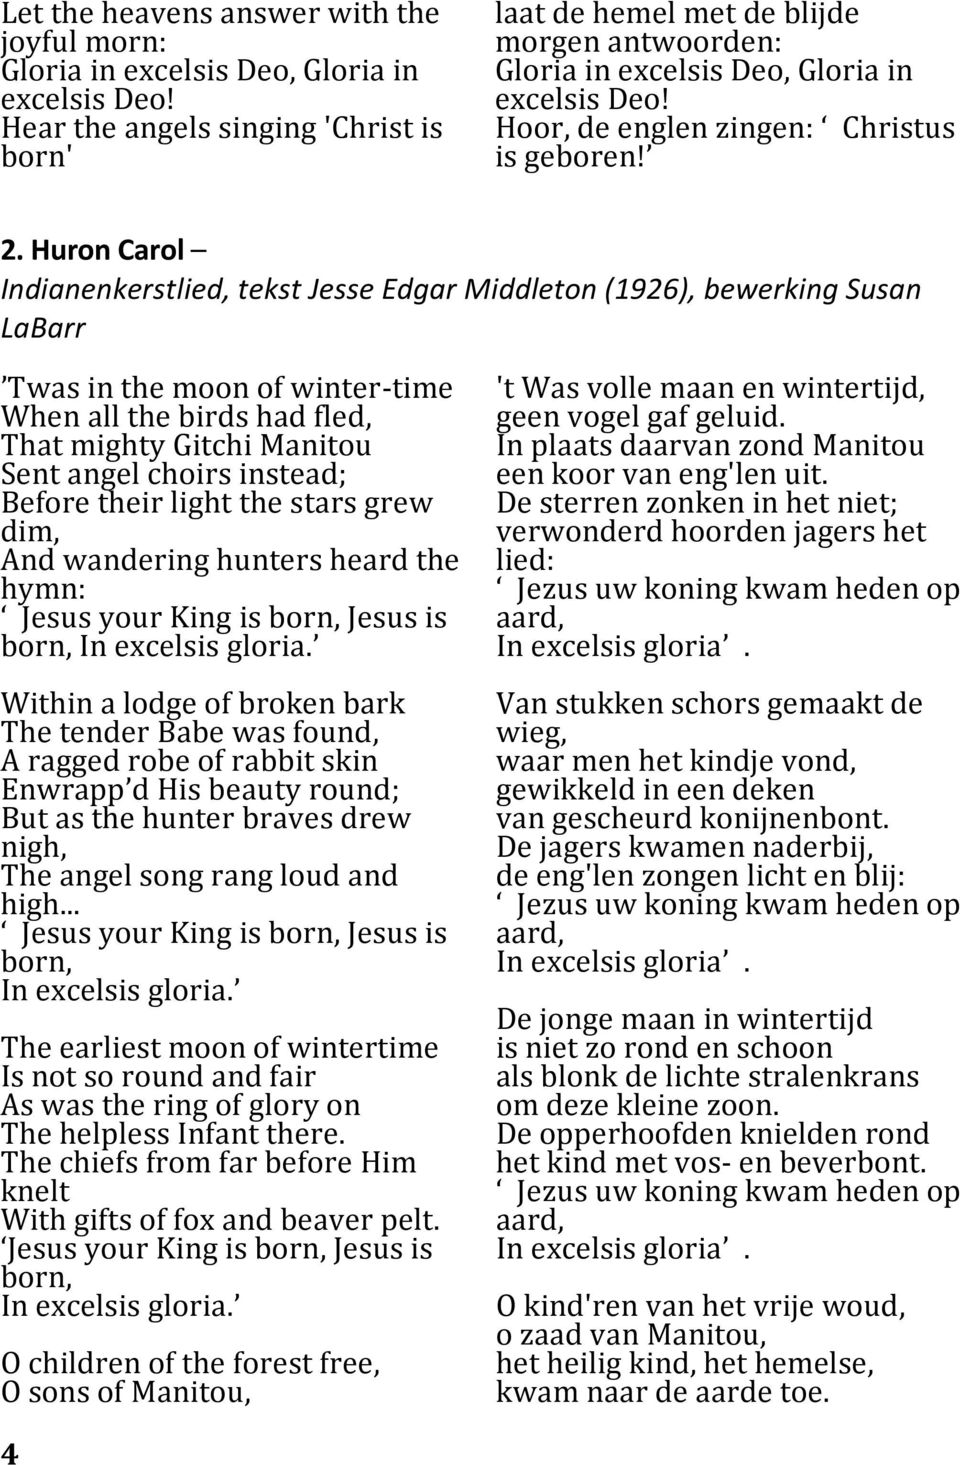 Huron Carol Indianenkerstlied, tekst Jesse Edgar Middleton (1926), bewerking Susan LaBarr Twas in the moon of winter-time When all the birds had fled, That mighty Gitchi Manitou Sent angel choirs